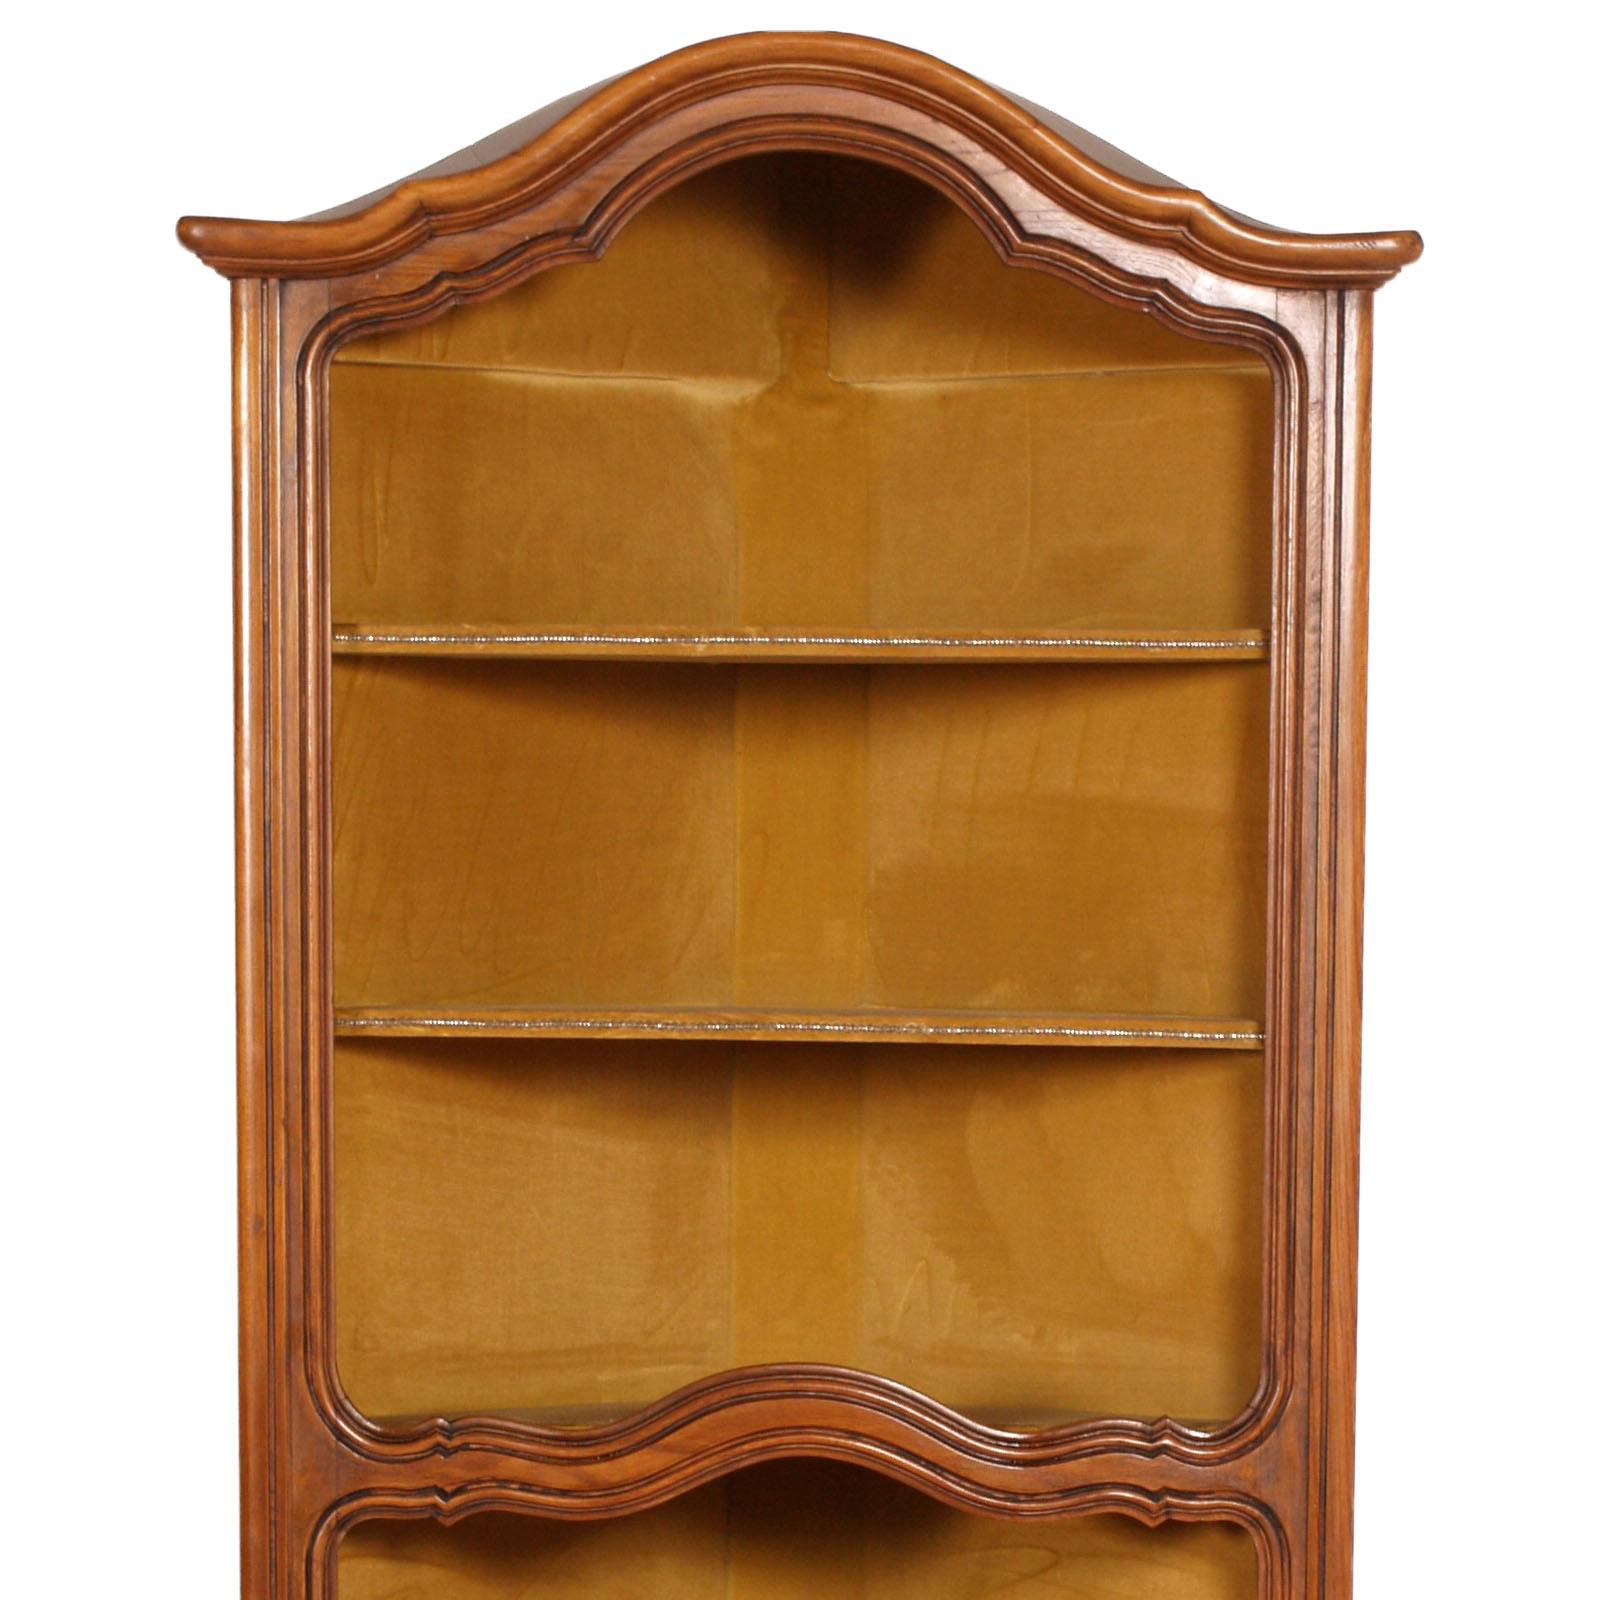 Early  20th century, Italy Venetian Baroque corner cupboard, bookcase, restored, wax polished. Period Belle Époque. Original ocher velvet upholstery of the era in good condition still usable

Measure cm: H 191, W 72, D 50 x 50.

 